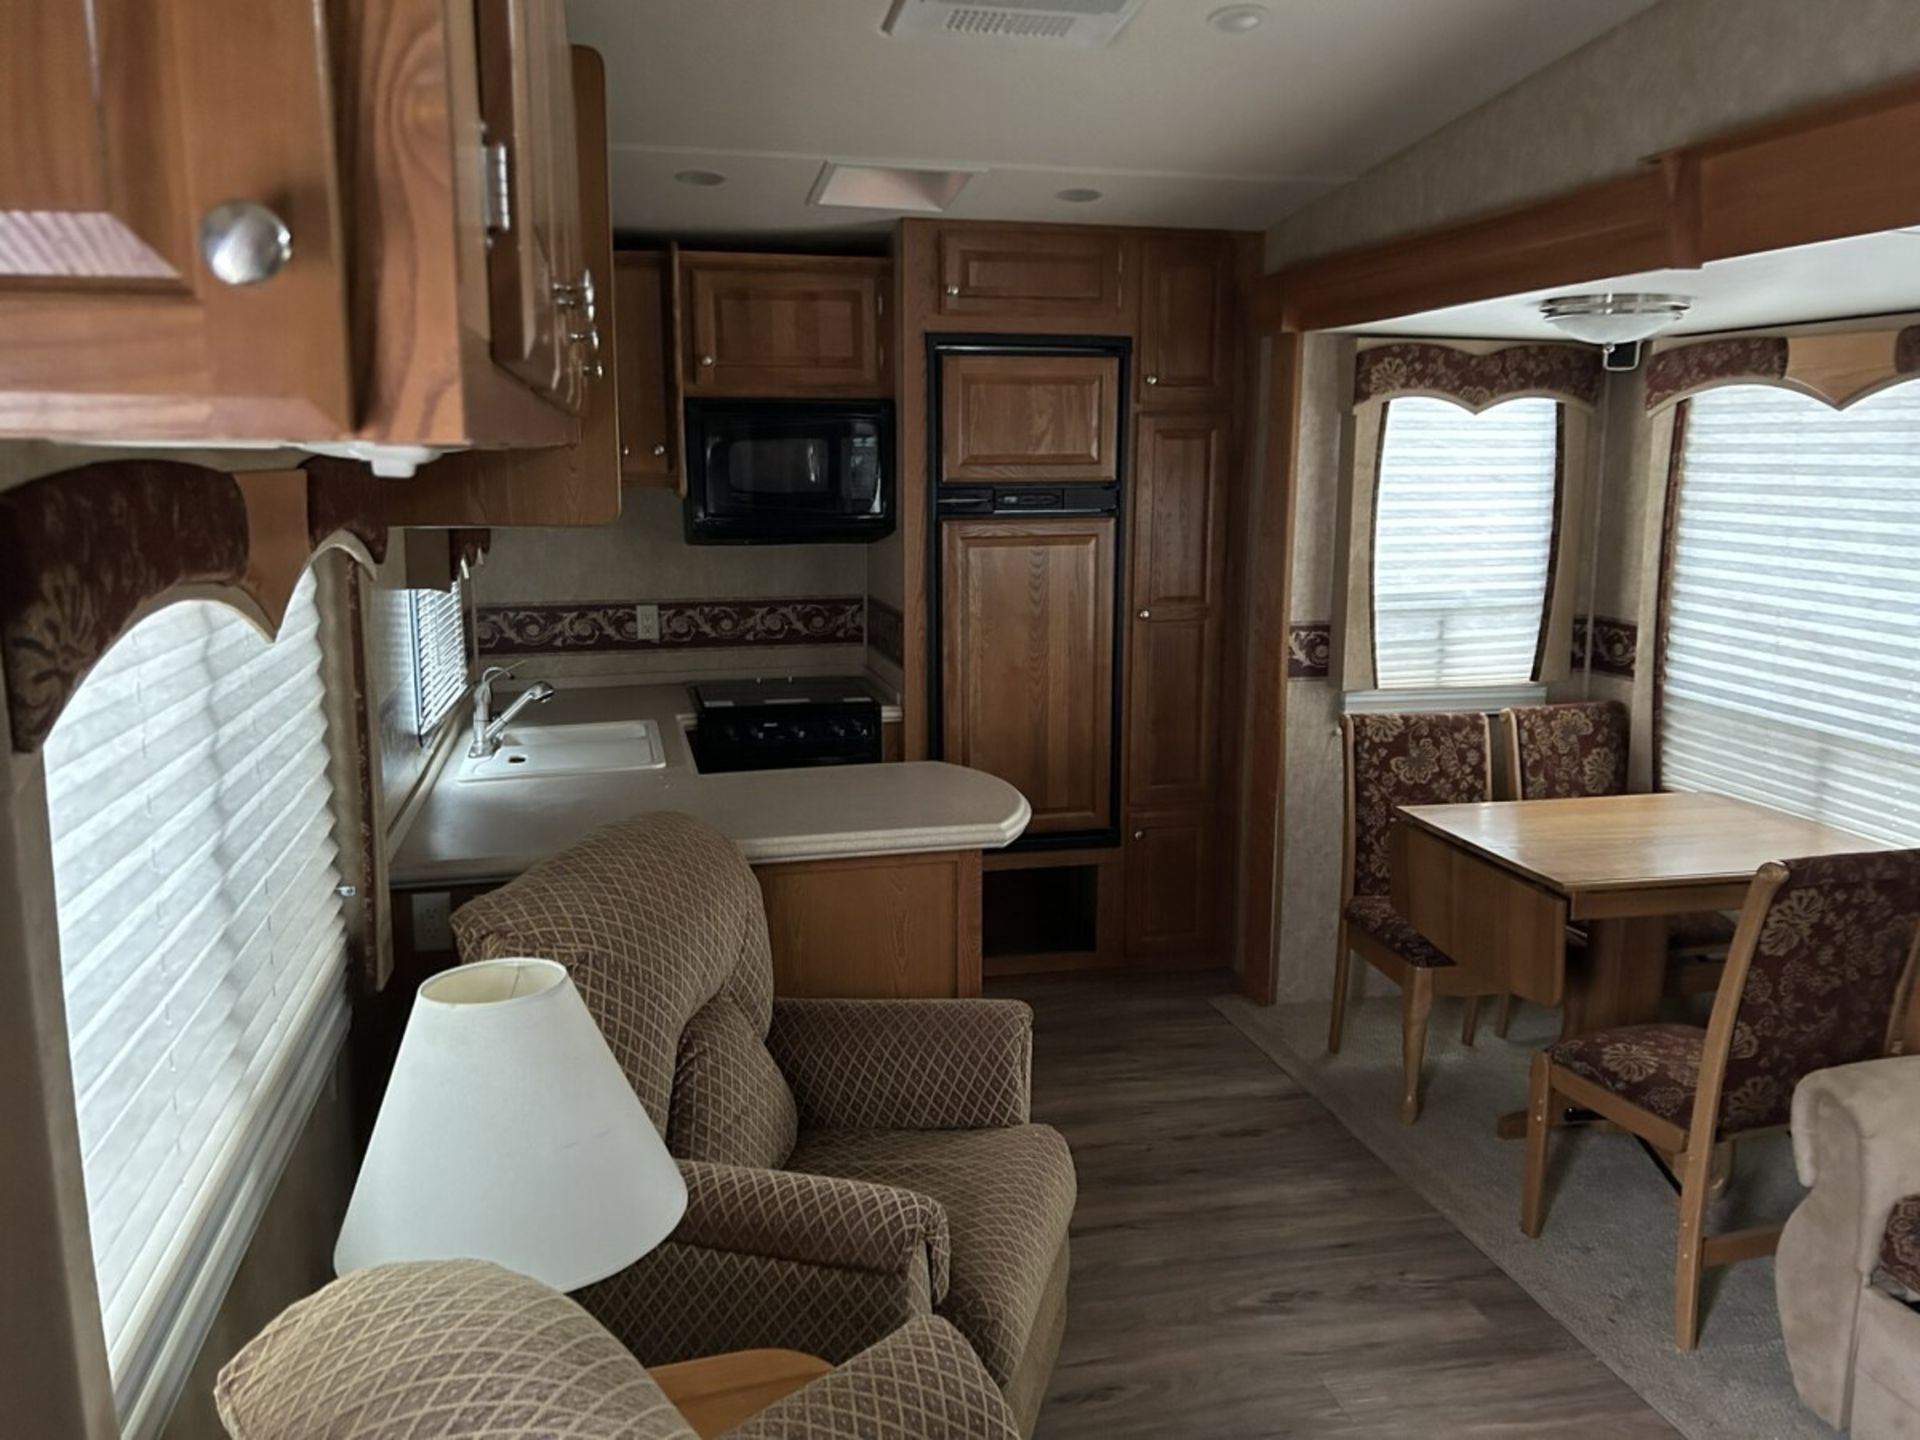 2007 GRAND JUNCTION 29DRK BY DUTCHMEN - DOUBLE SLIDE, AWNING, AC, REAR KITCHEN, FRONT QUEEN - Image 9 of 16